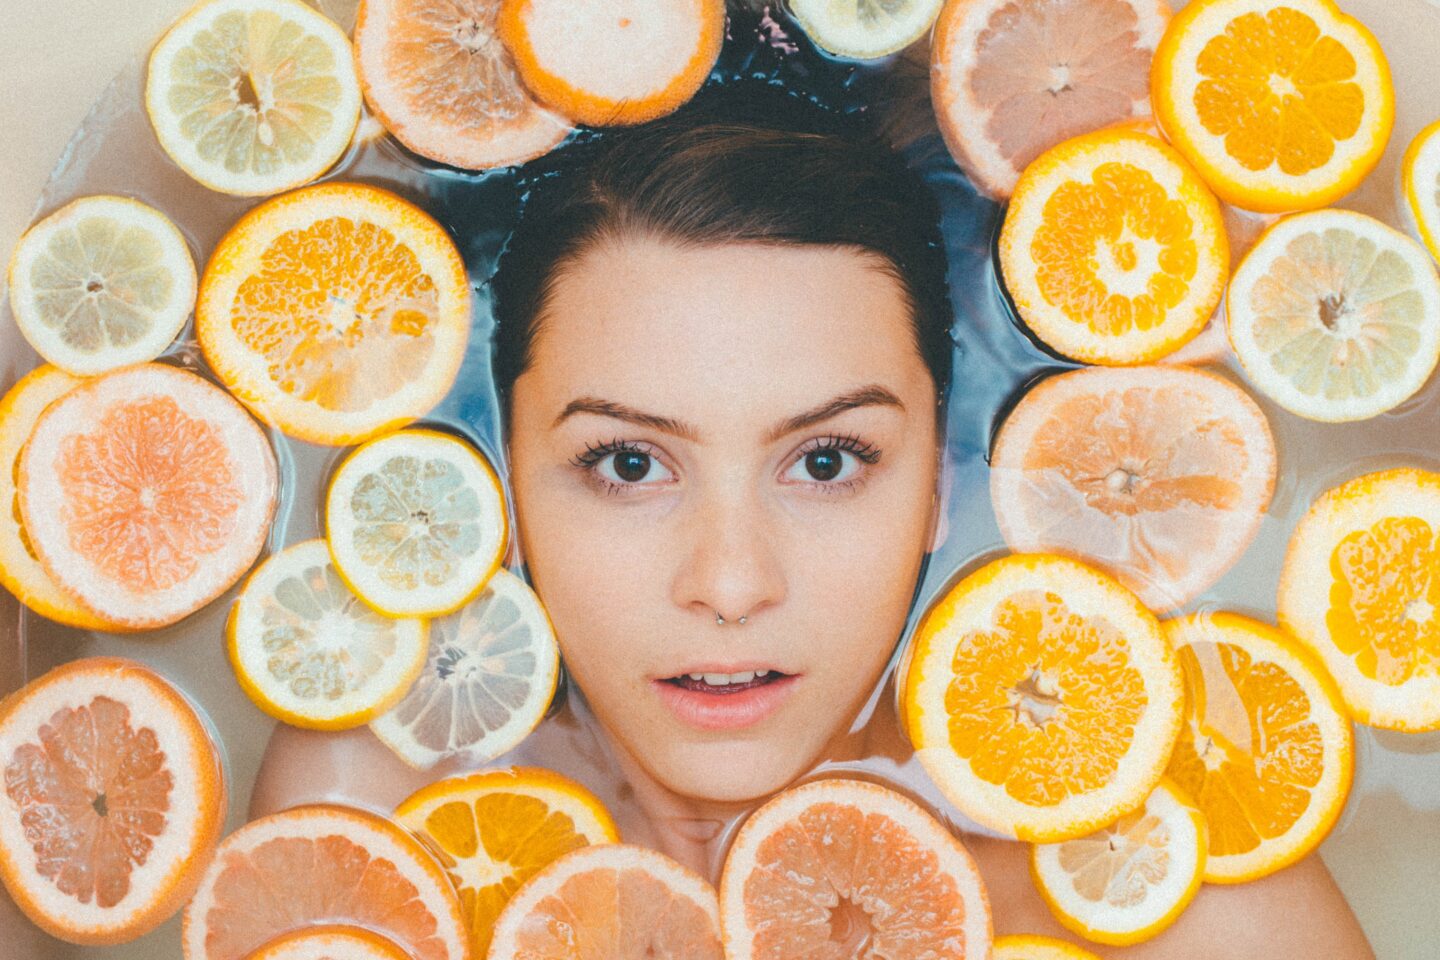 A lady's face looking out from a bath filled with orange slices